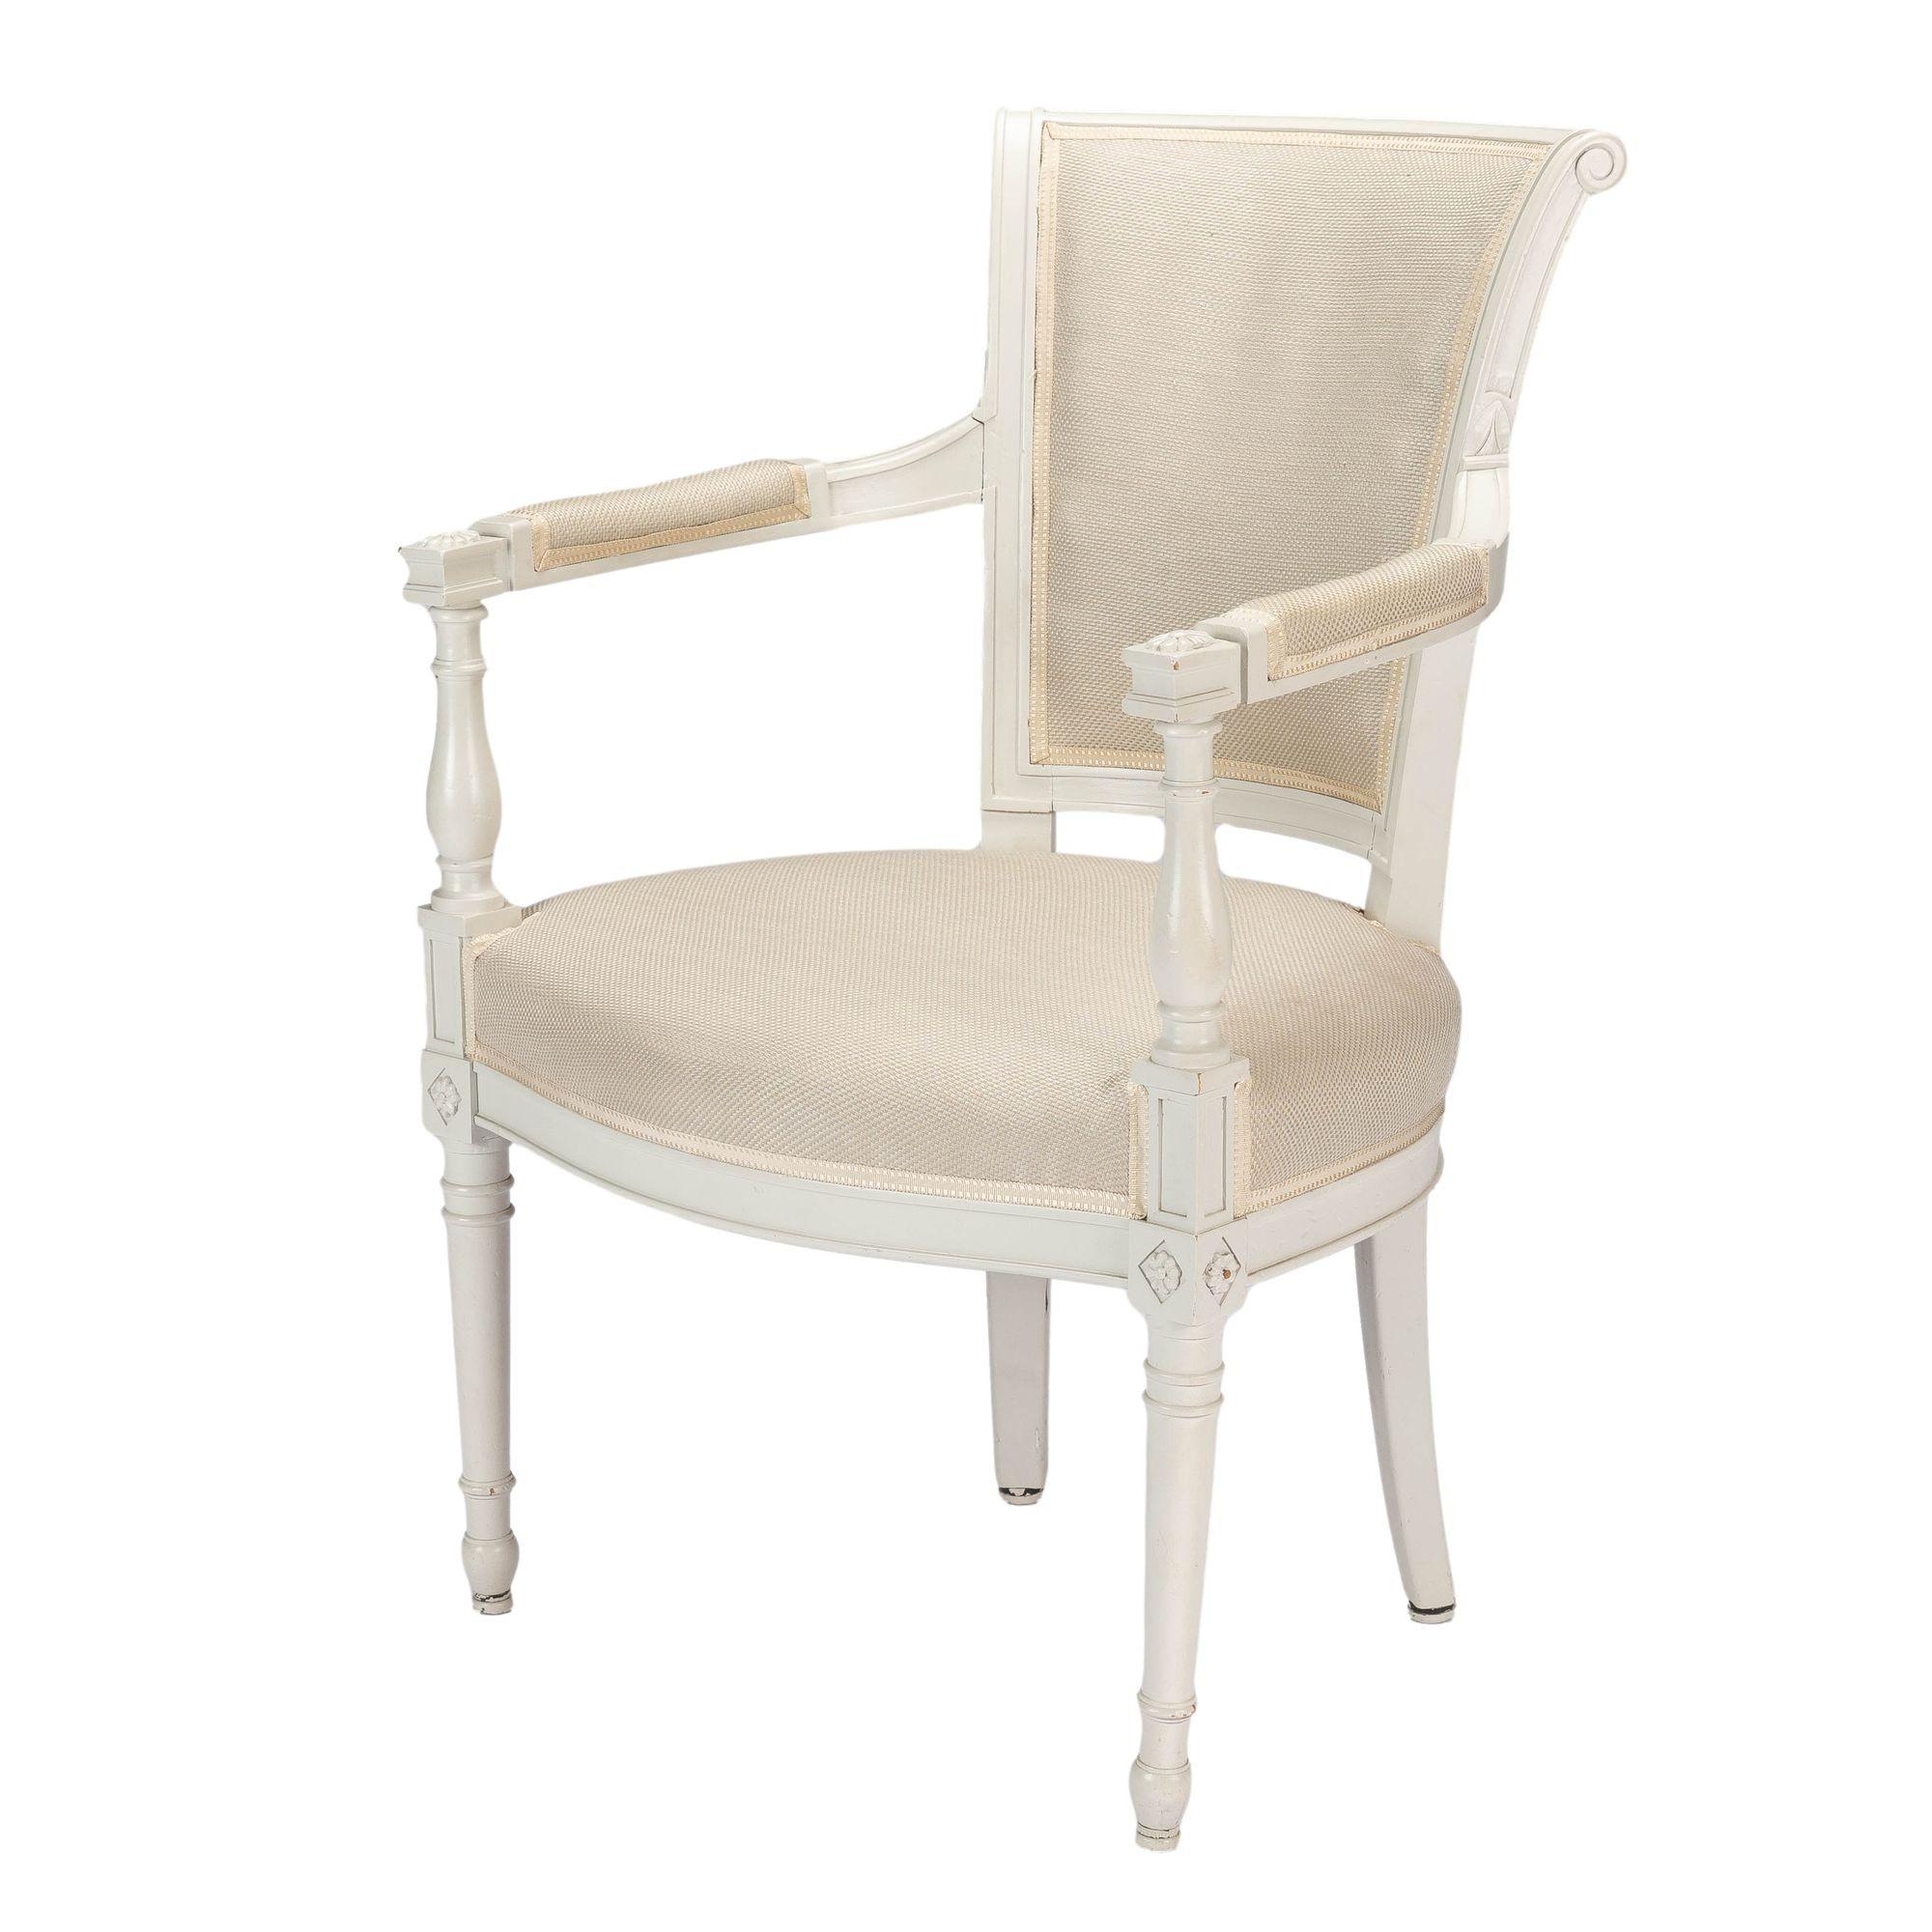 Oyster gray painted beechwood Academic Revival fauteuil in the Louis XVI taste. The chair has a boxed upholstered seat on a painted beechwood seat frame. The front legs are turned and joined at the seat rail to a baluster turned arm post. The arm